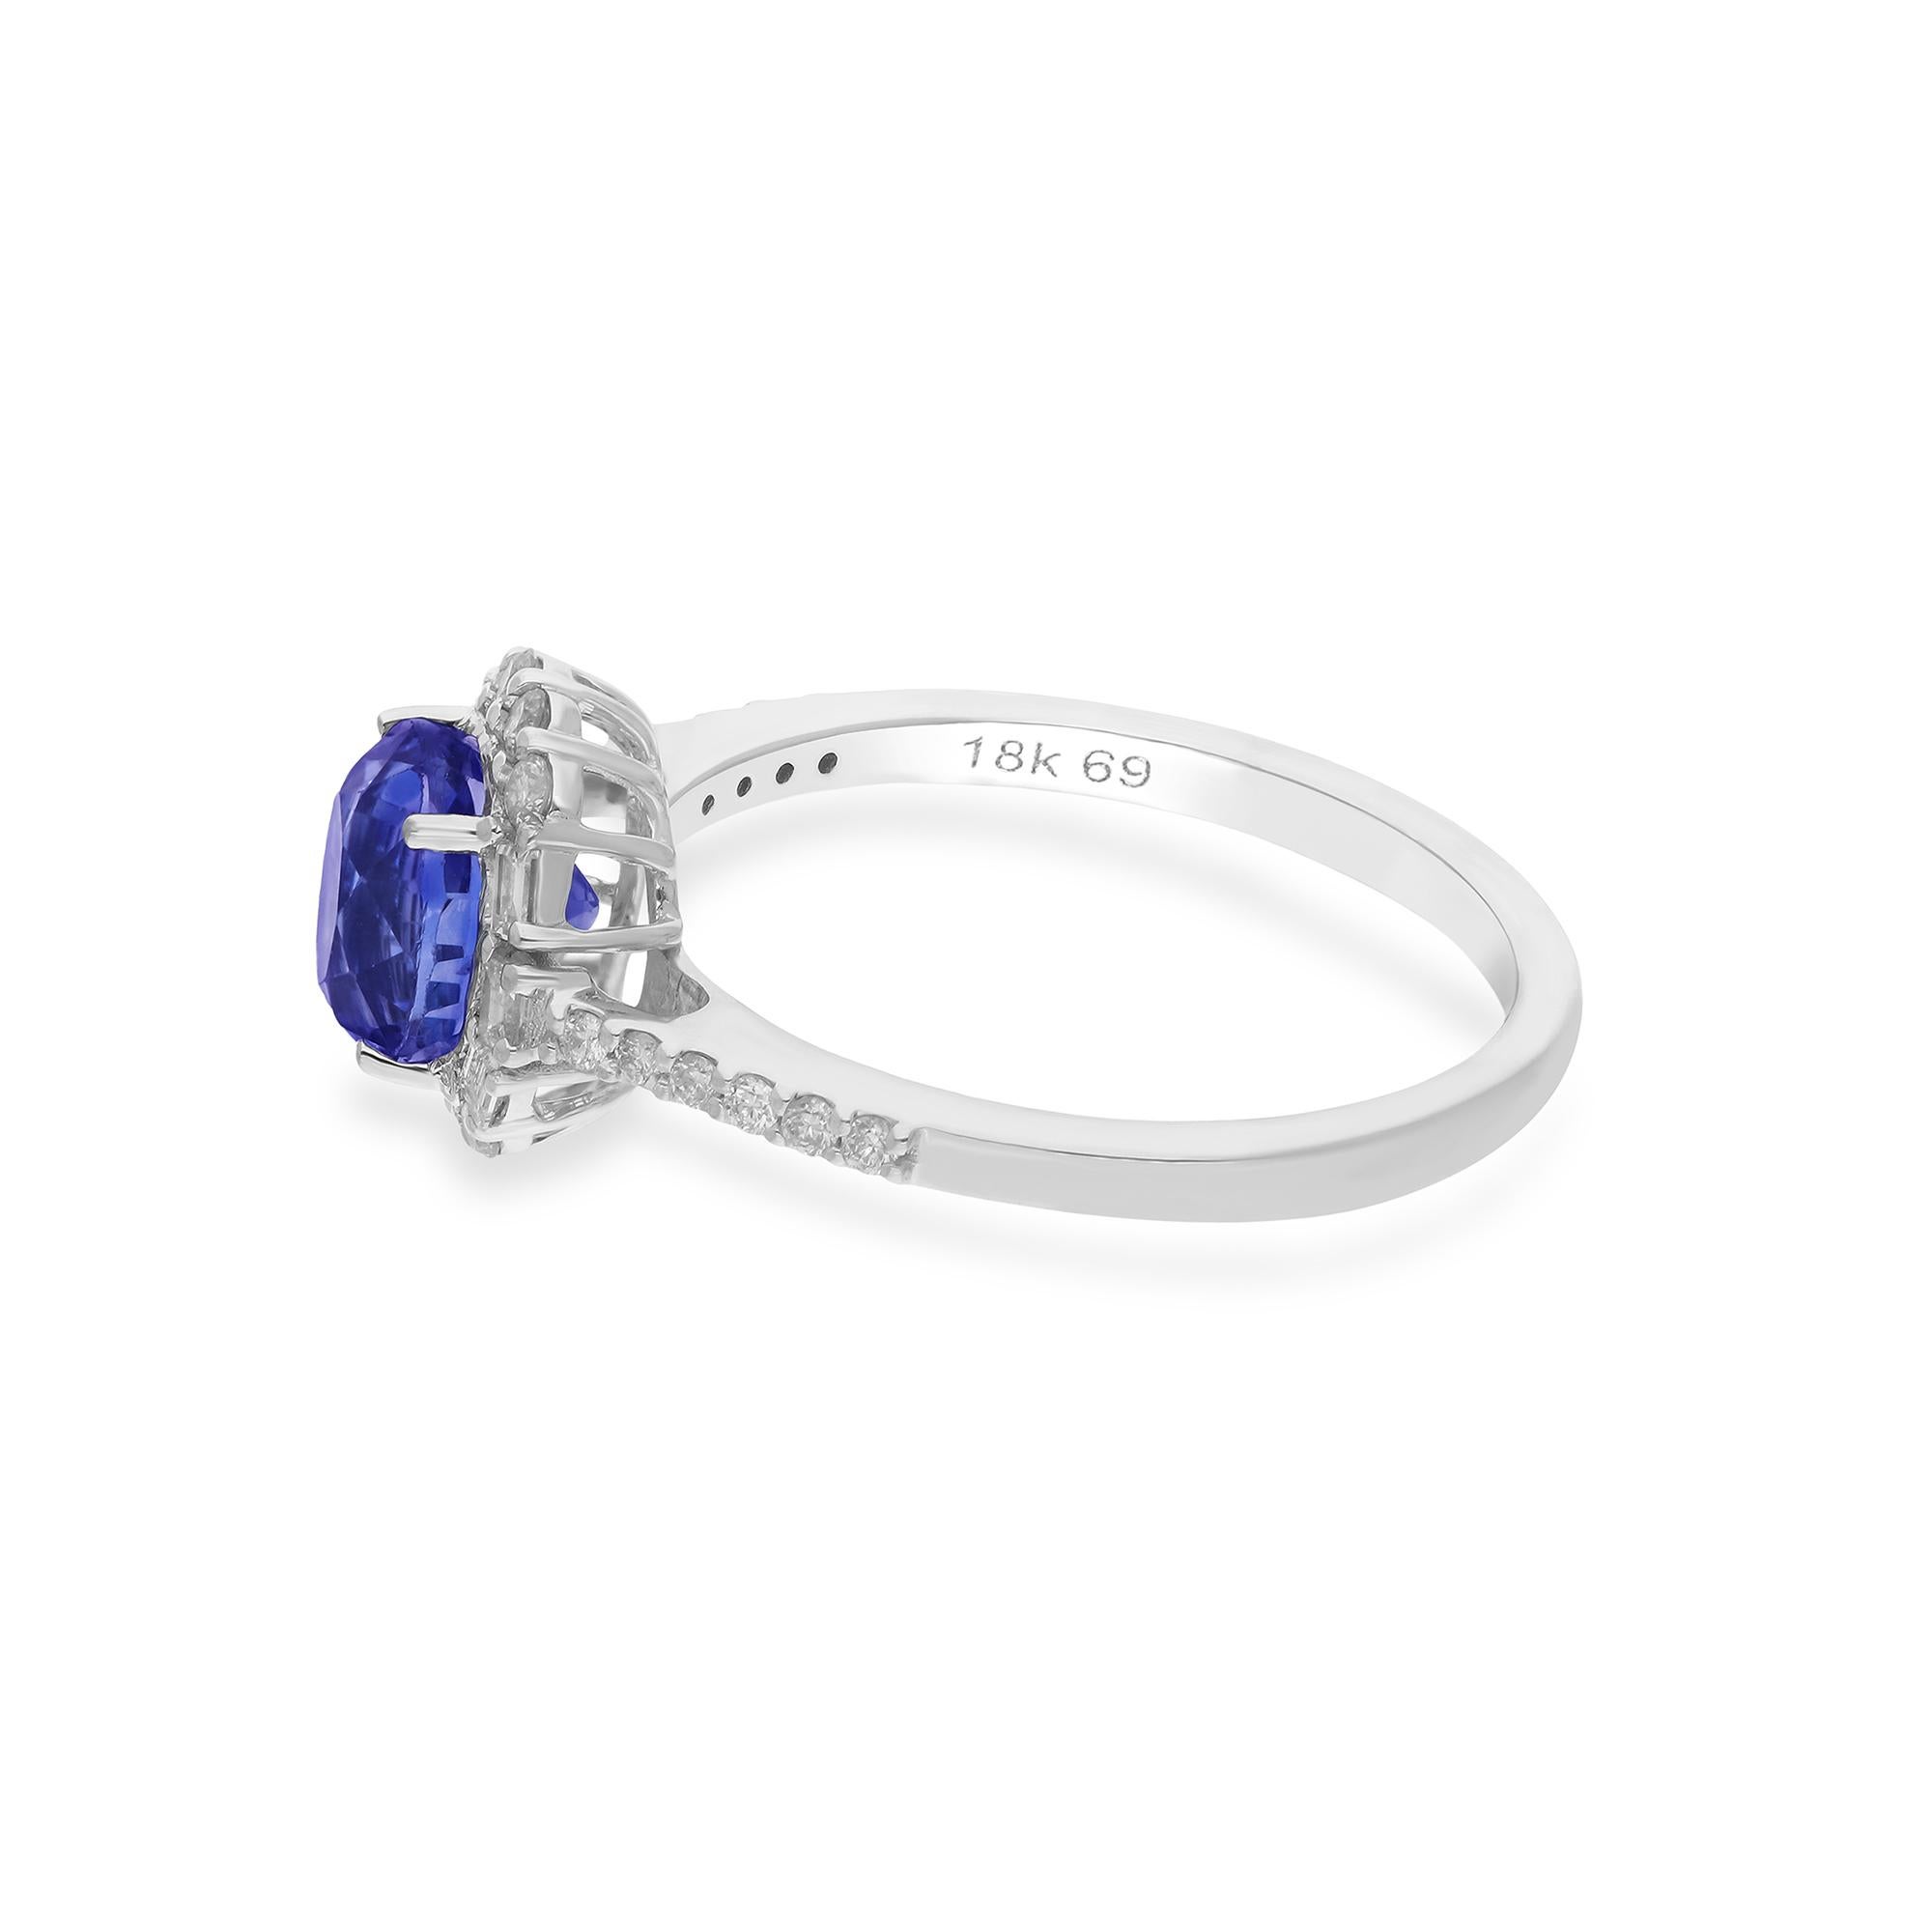 Indulge in the timeless elegance of this stunning Blue Sapphire Gemstone Cocktail Ring, adorned with sparkling baguette diamonds and expertly crafted in 14 karat white gold. Every aspect of this ring exudes sophistication and refinement, making it a